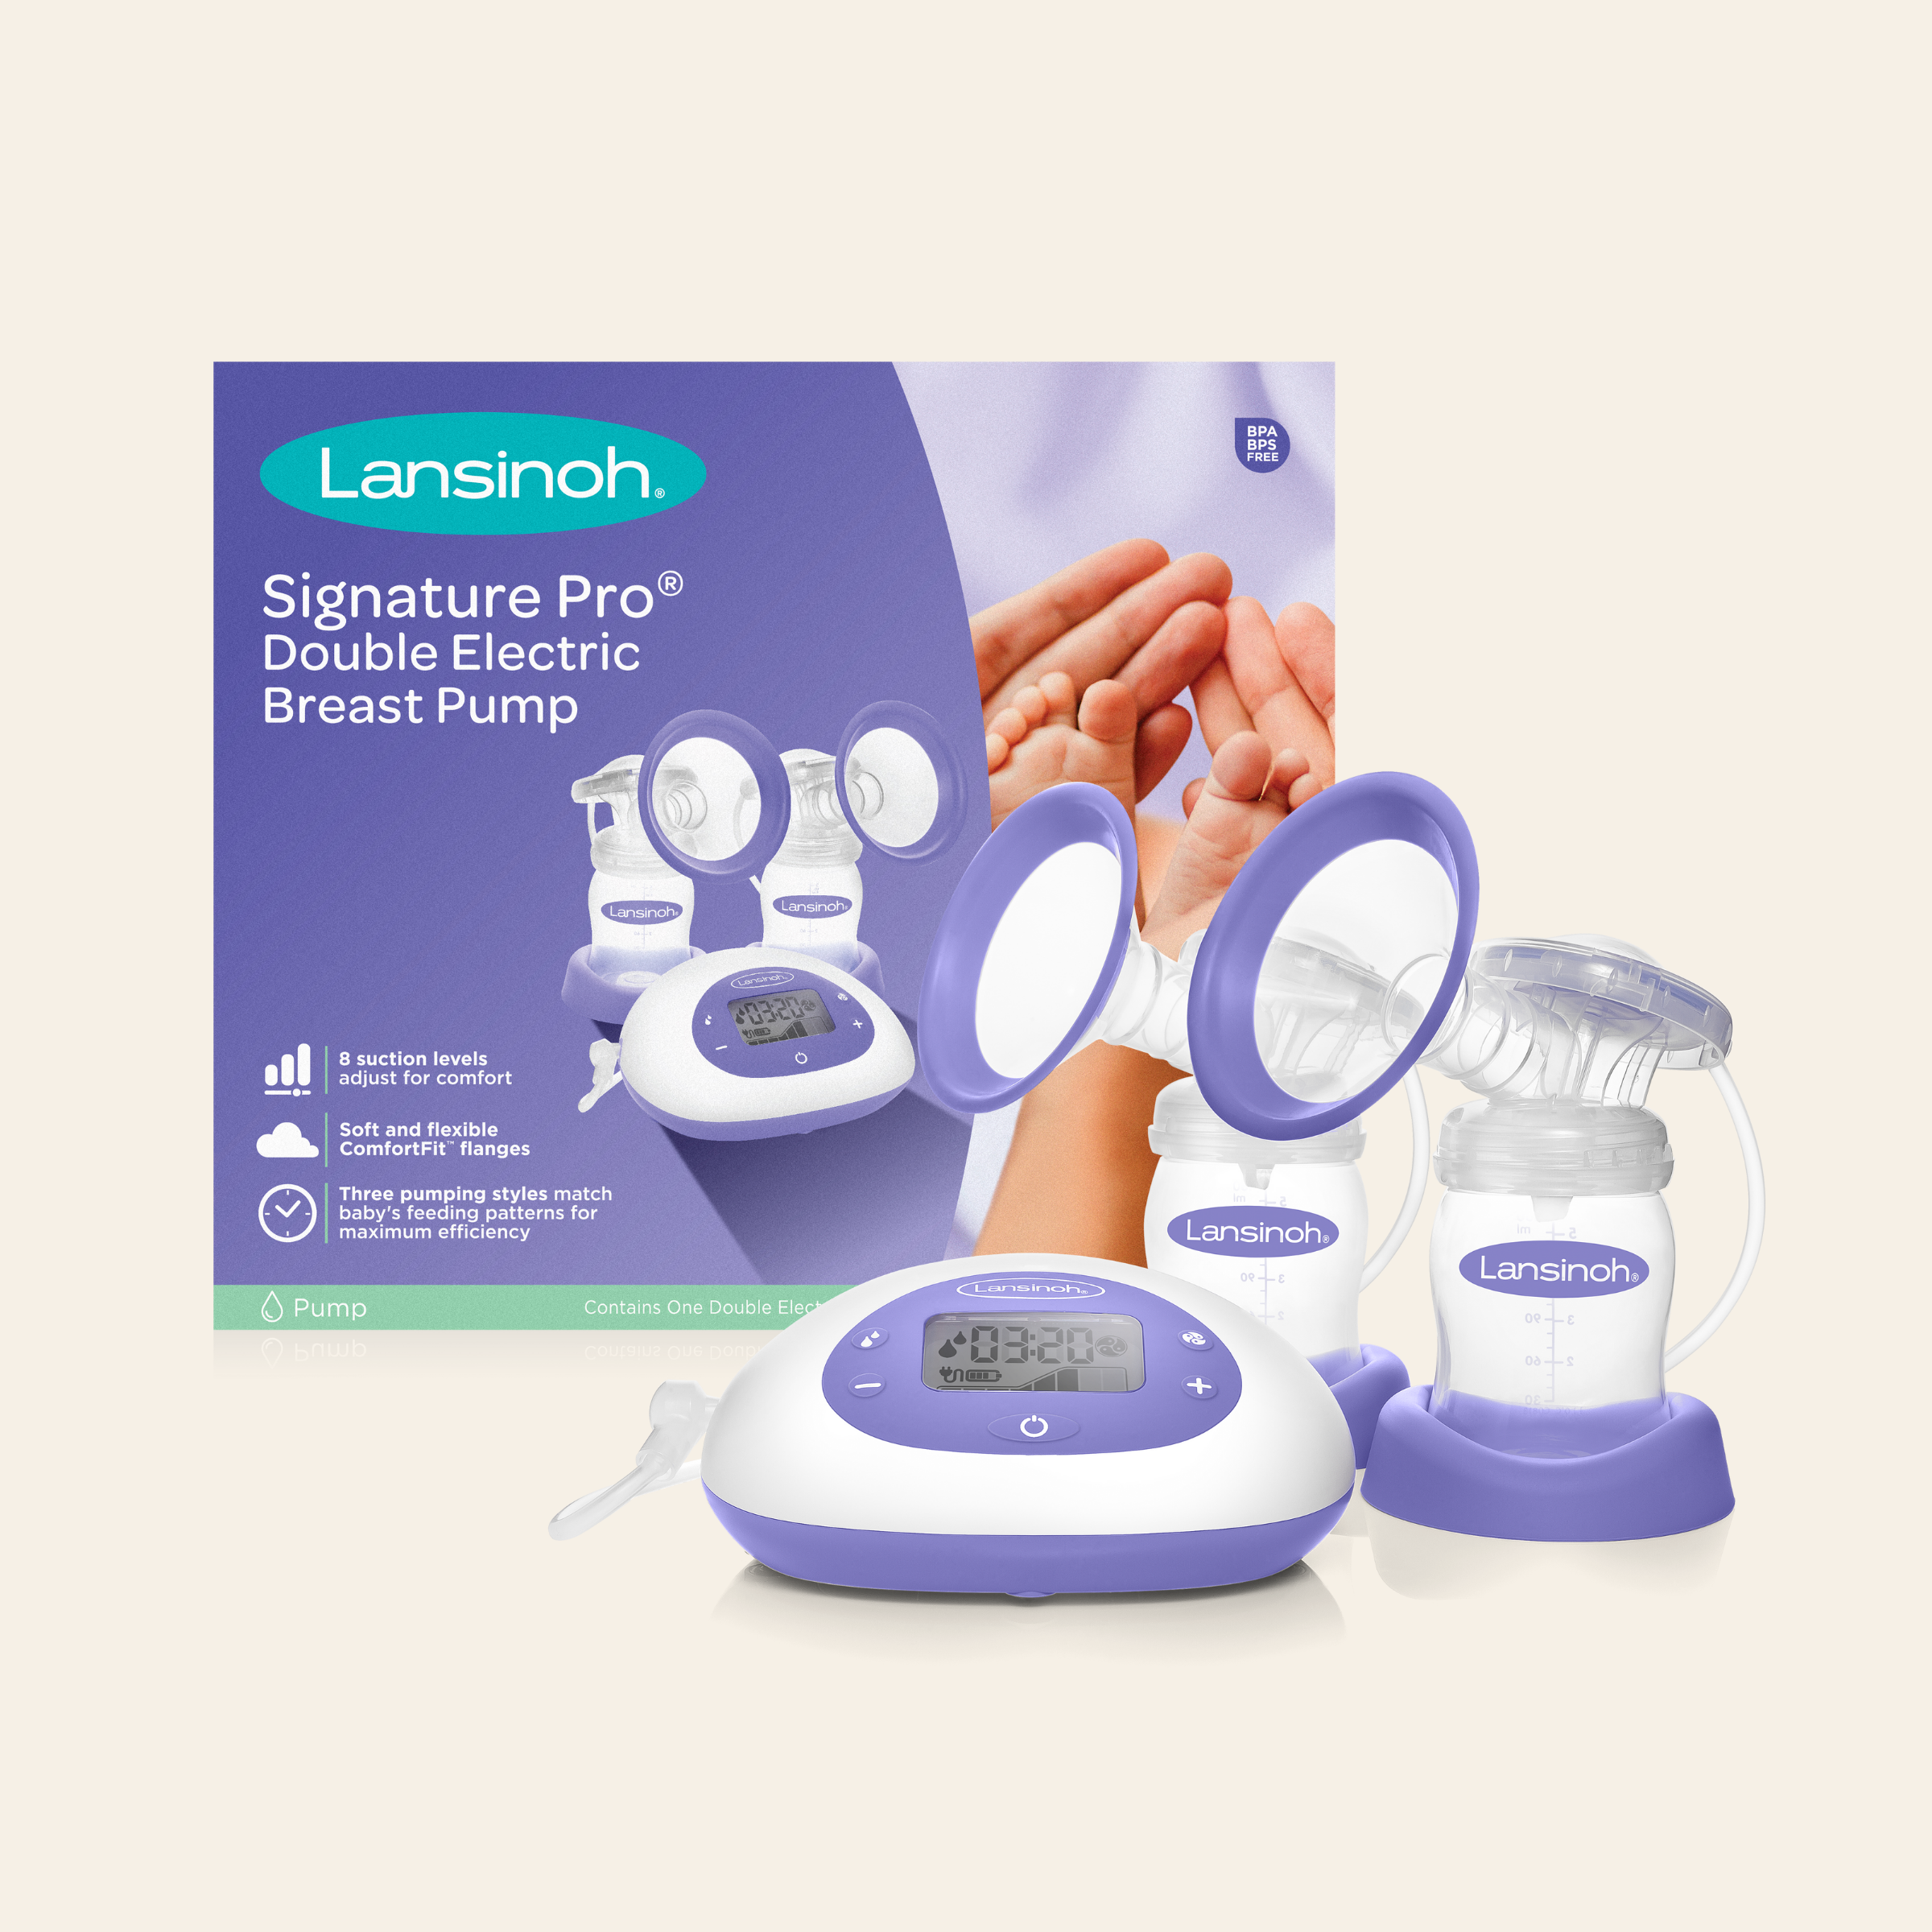 Lansinoh Signature Pro Double Electric Breast Pump - image 2 of 9